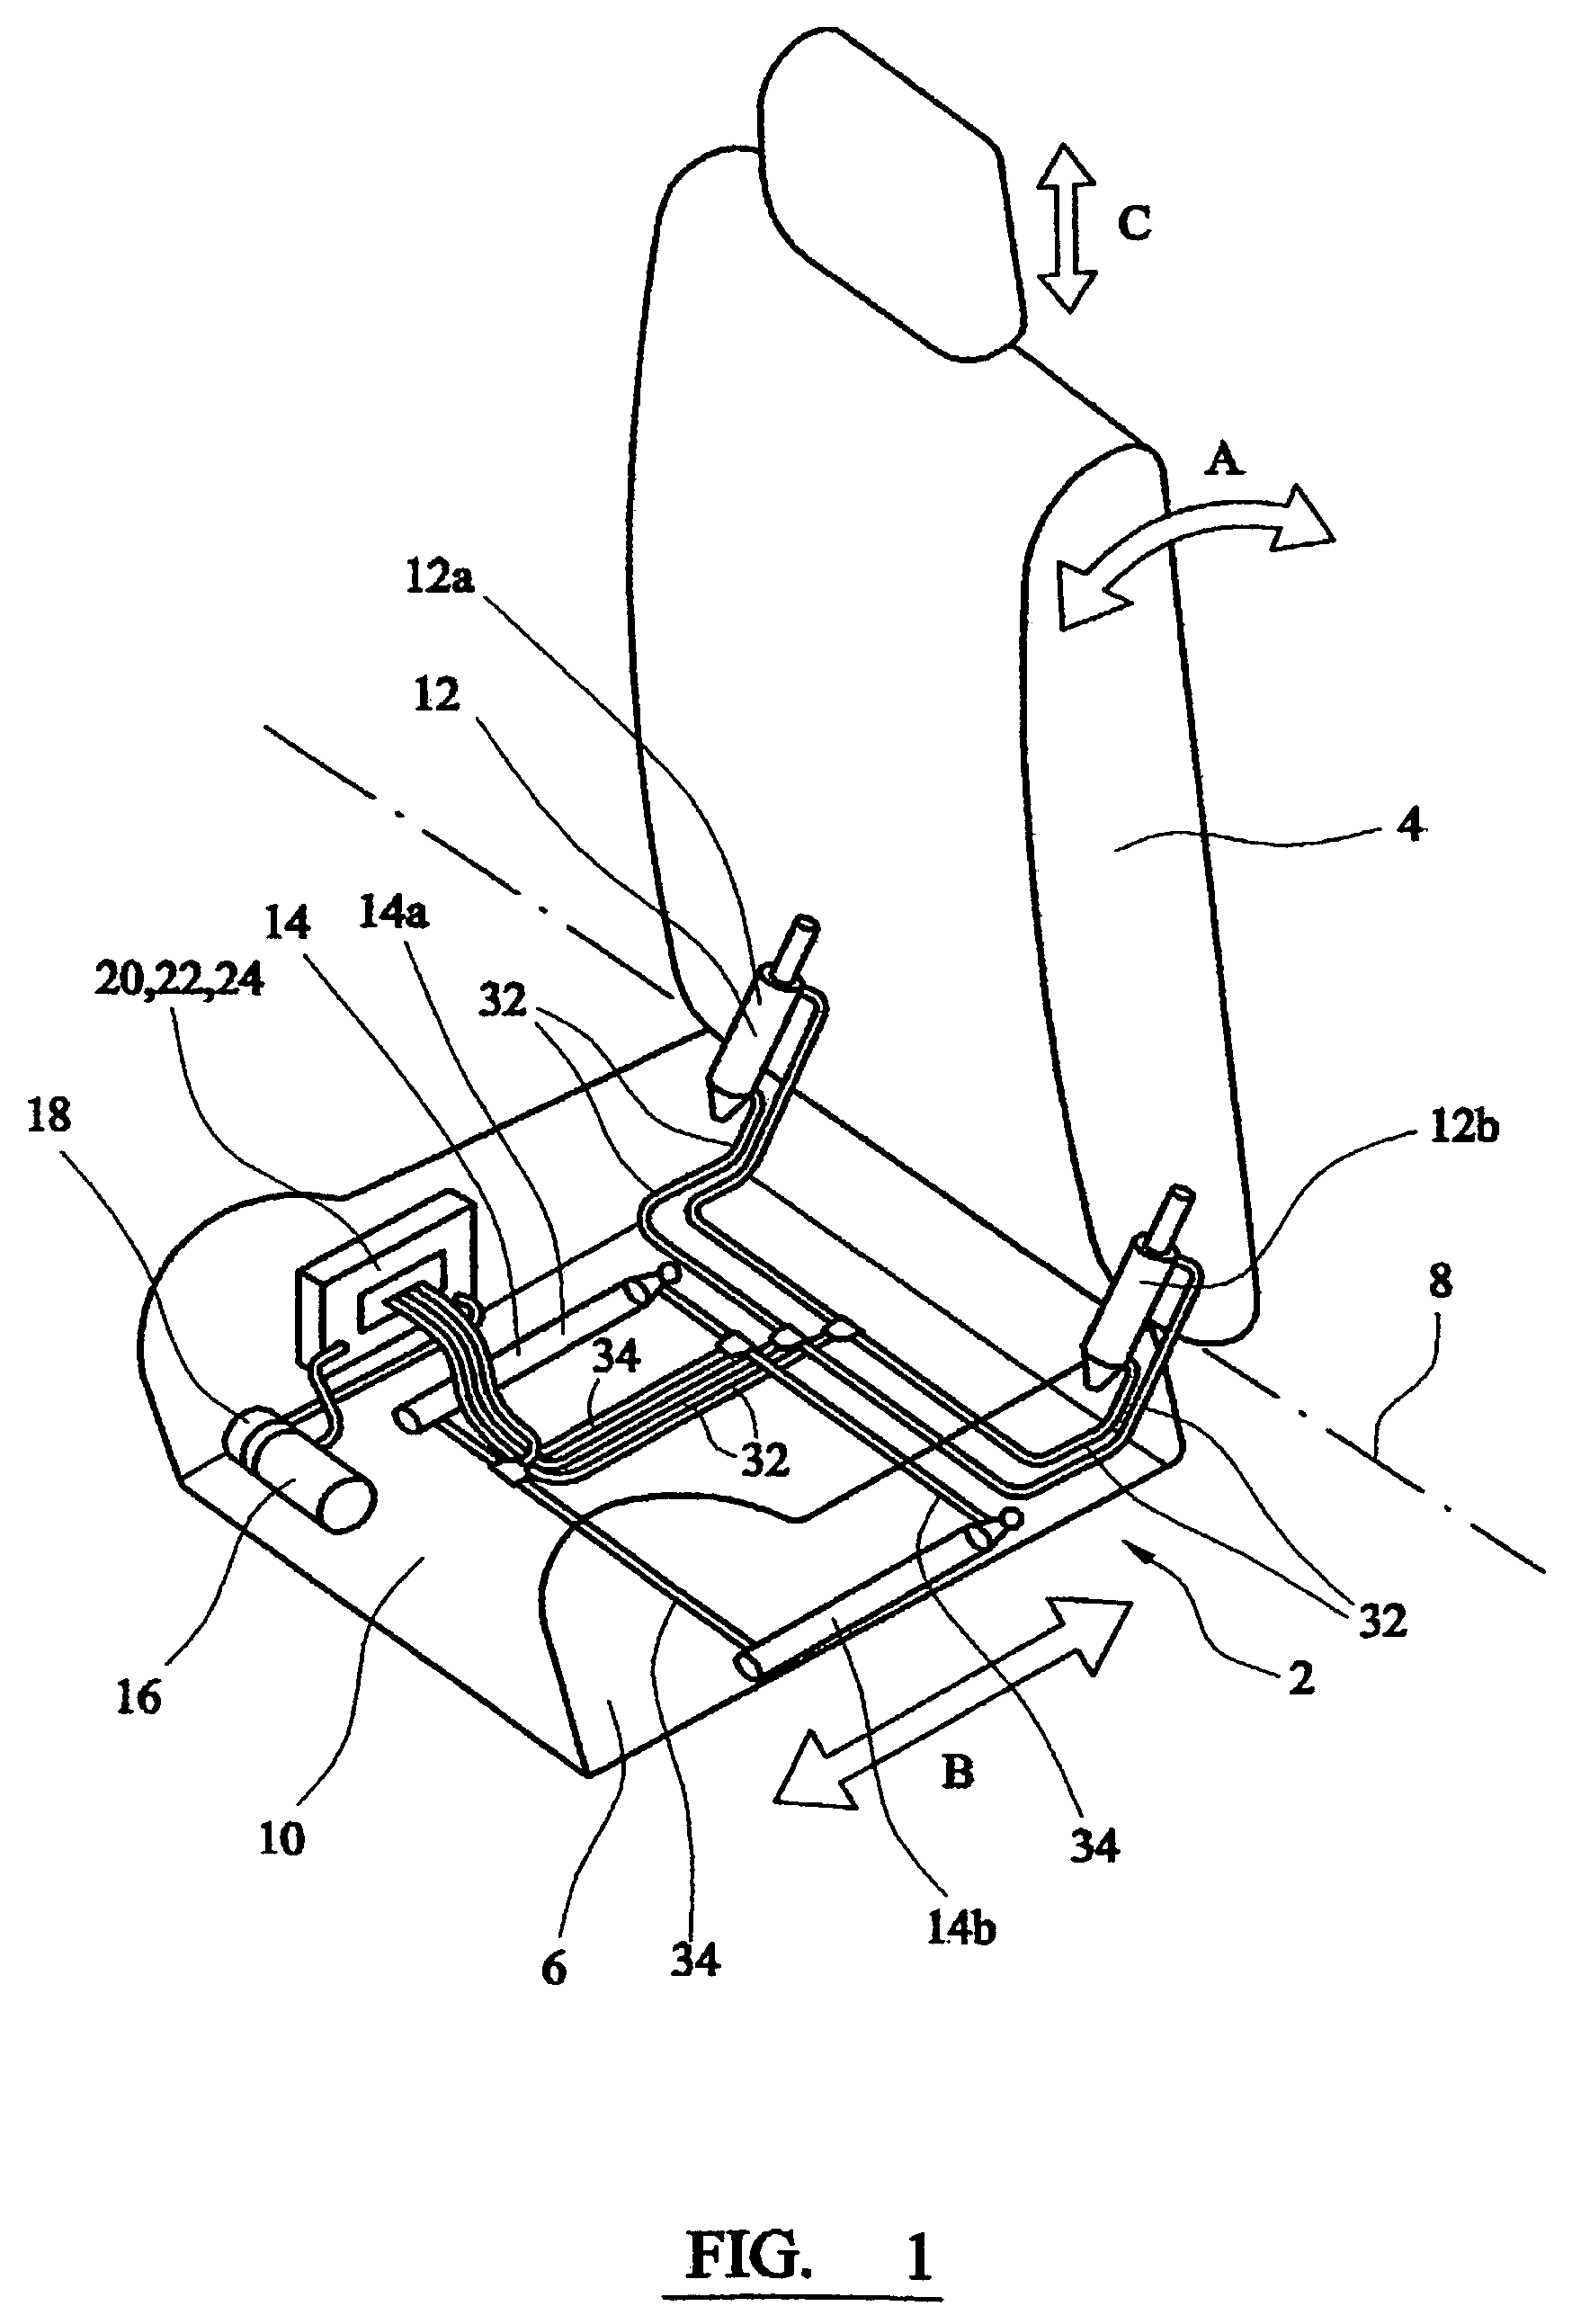 Hydraulic vehicle seat adjustment with system protection valve